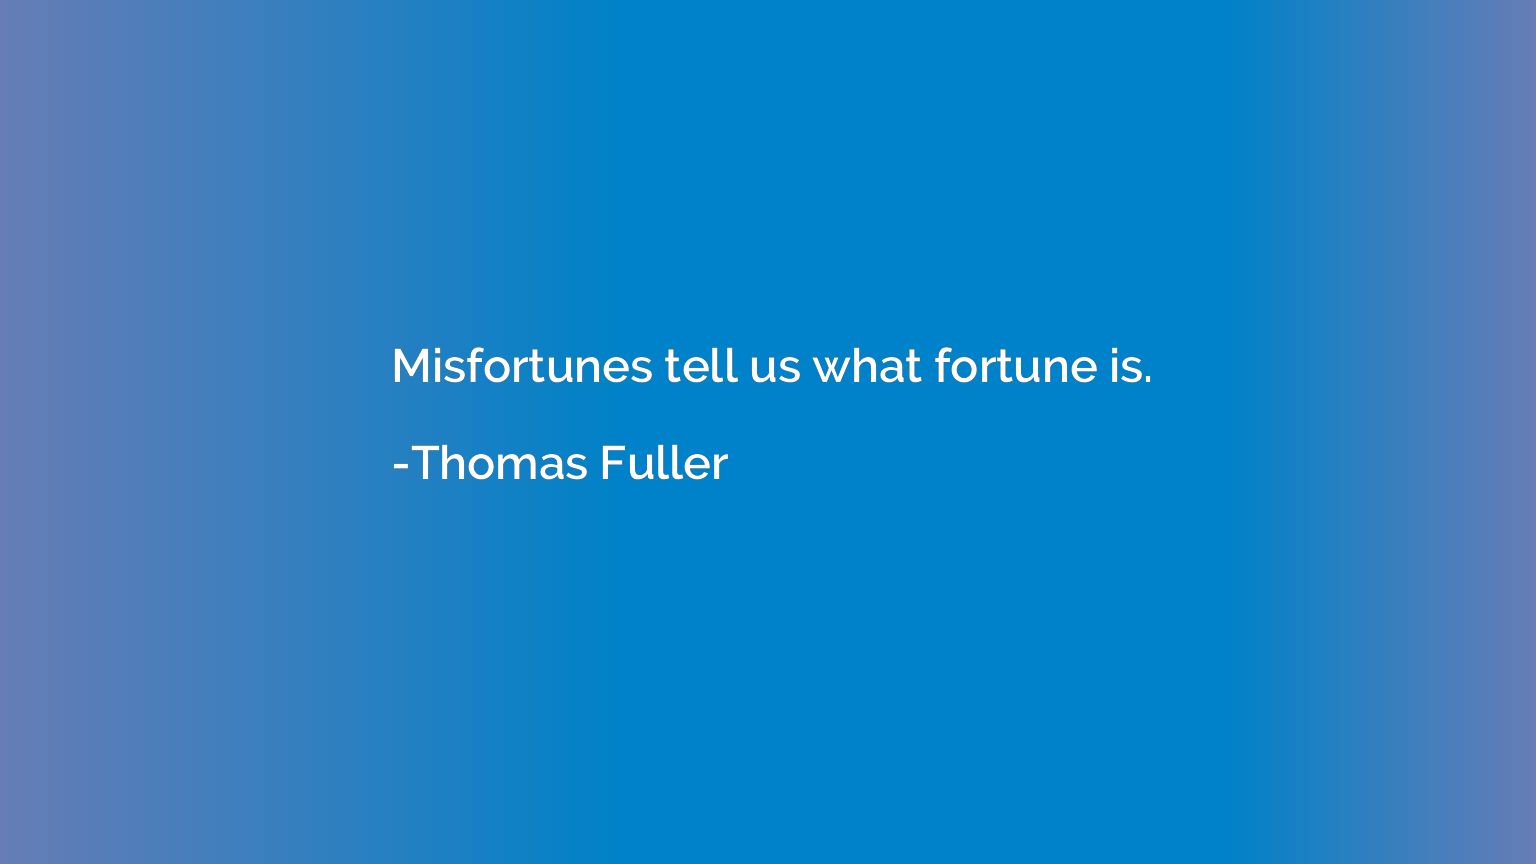 Misfortunes tell us what fortune is.